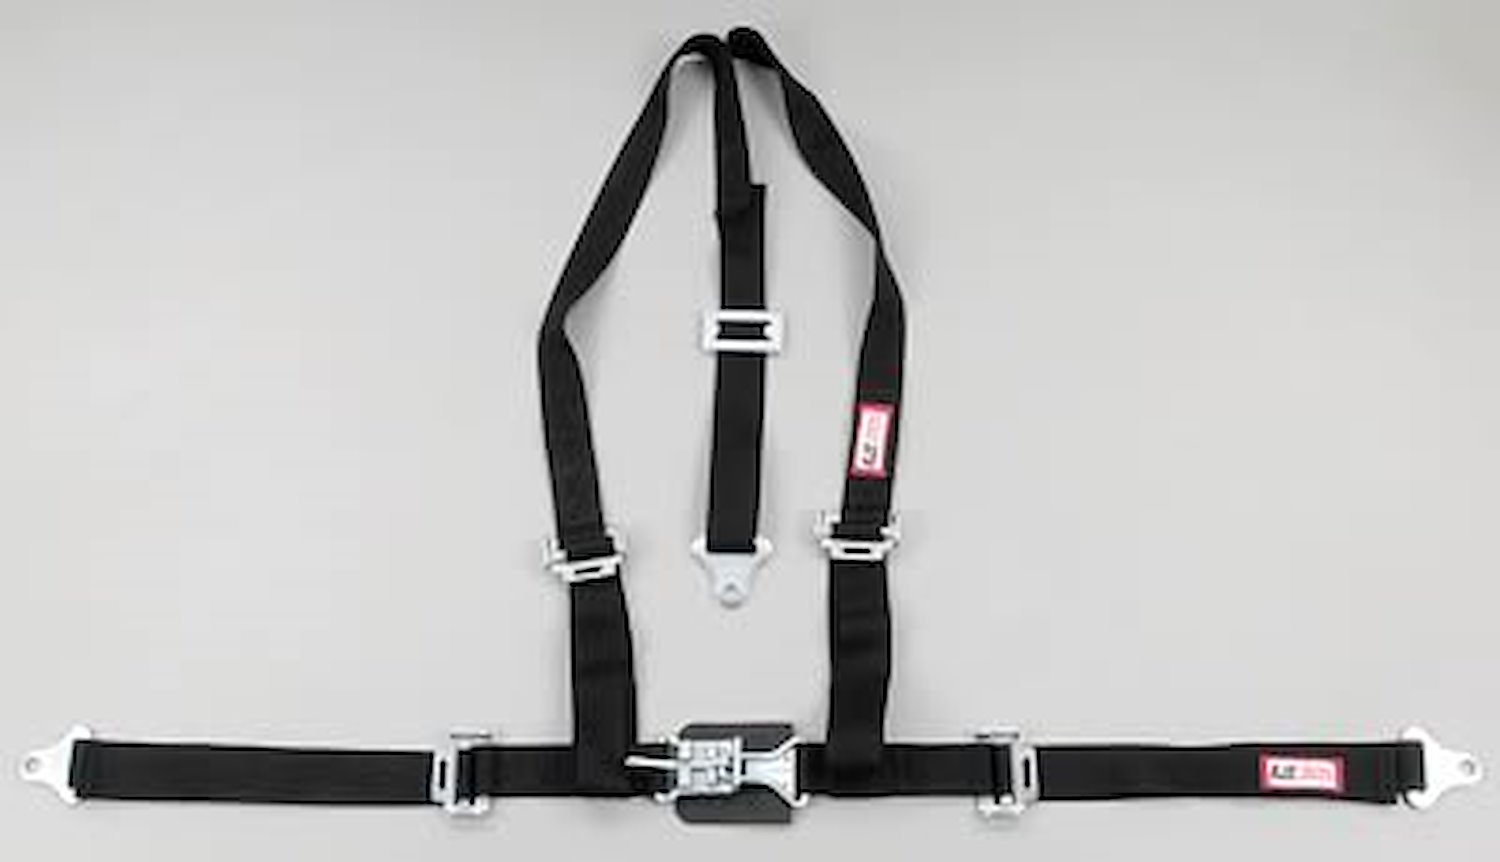 NON-SFI L&L HARNESS 2 PULL UP Lap Belt SEWN IN 2 S.H. Y FLOOR Mount ALL WRAP ENDS HOT PINK